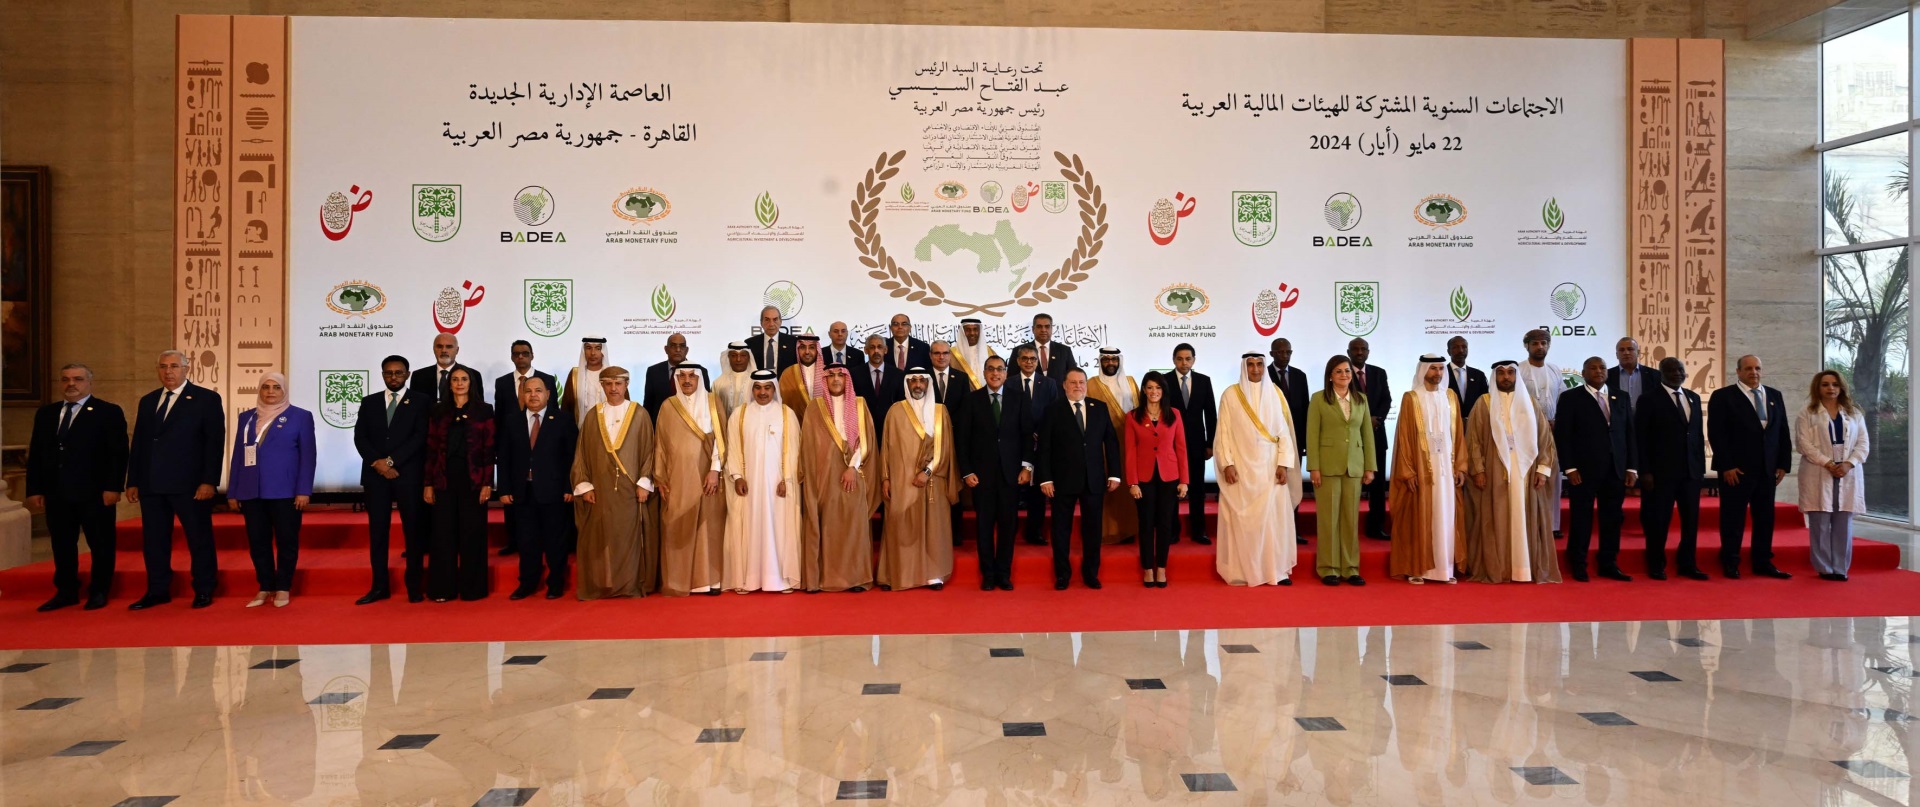 Madbouly attends joint annual meetings of Arab Financial Institutions 2024

